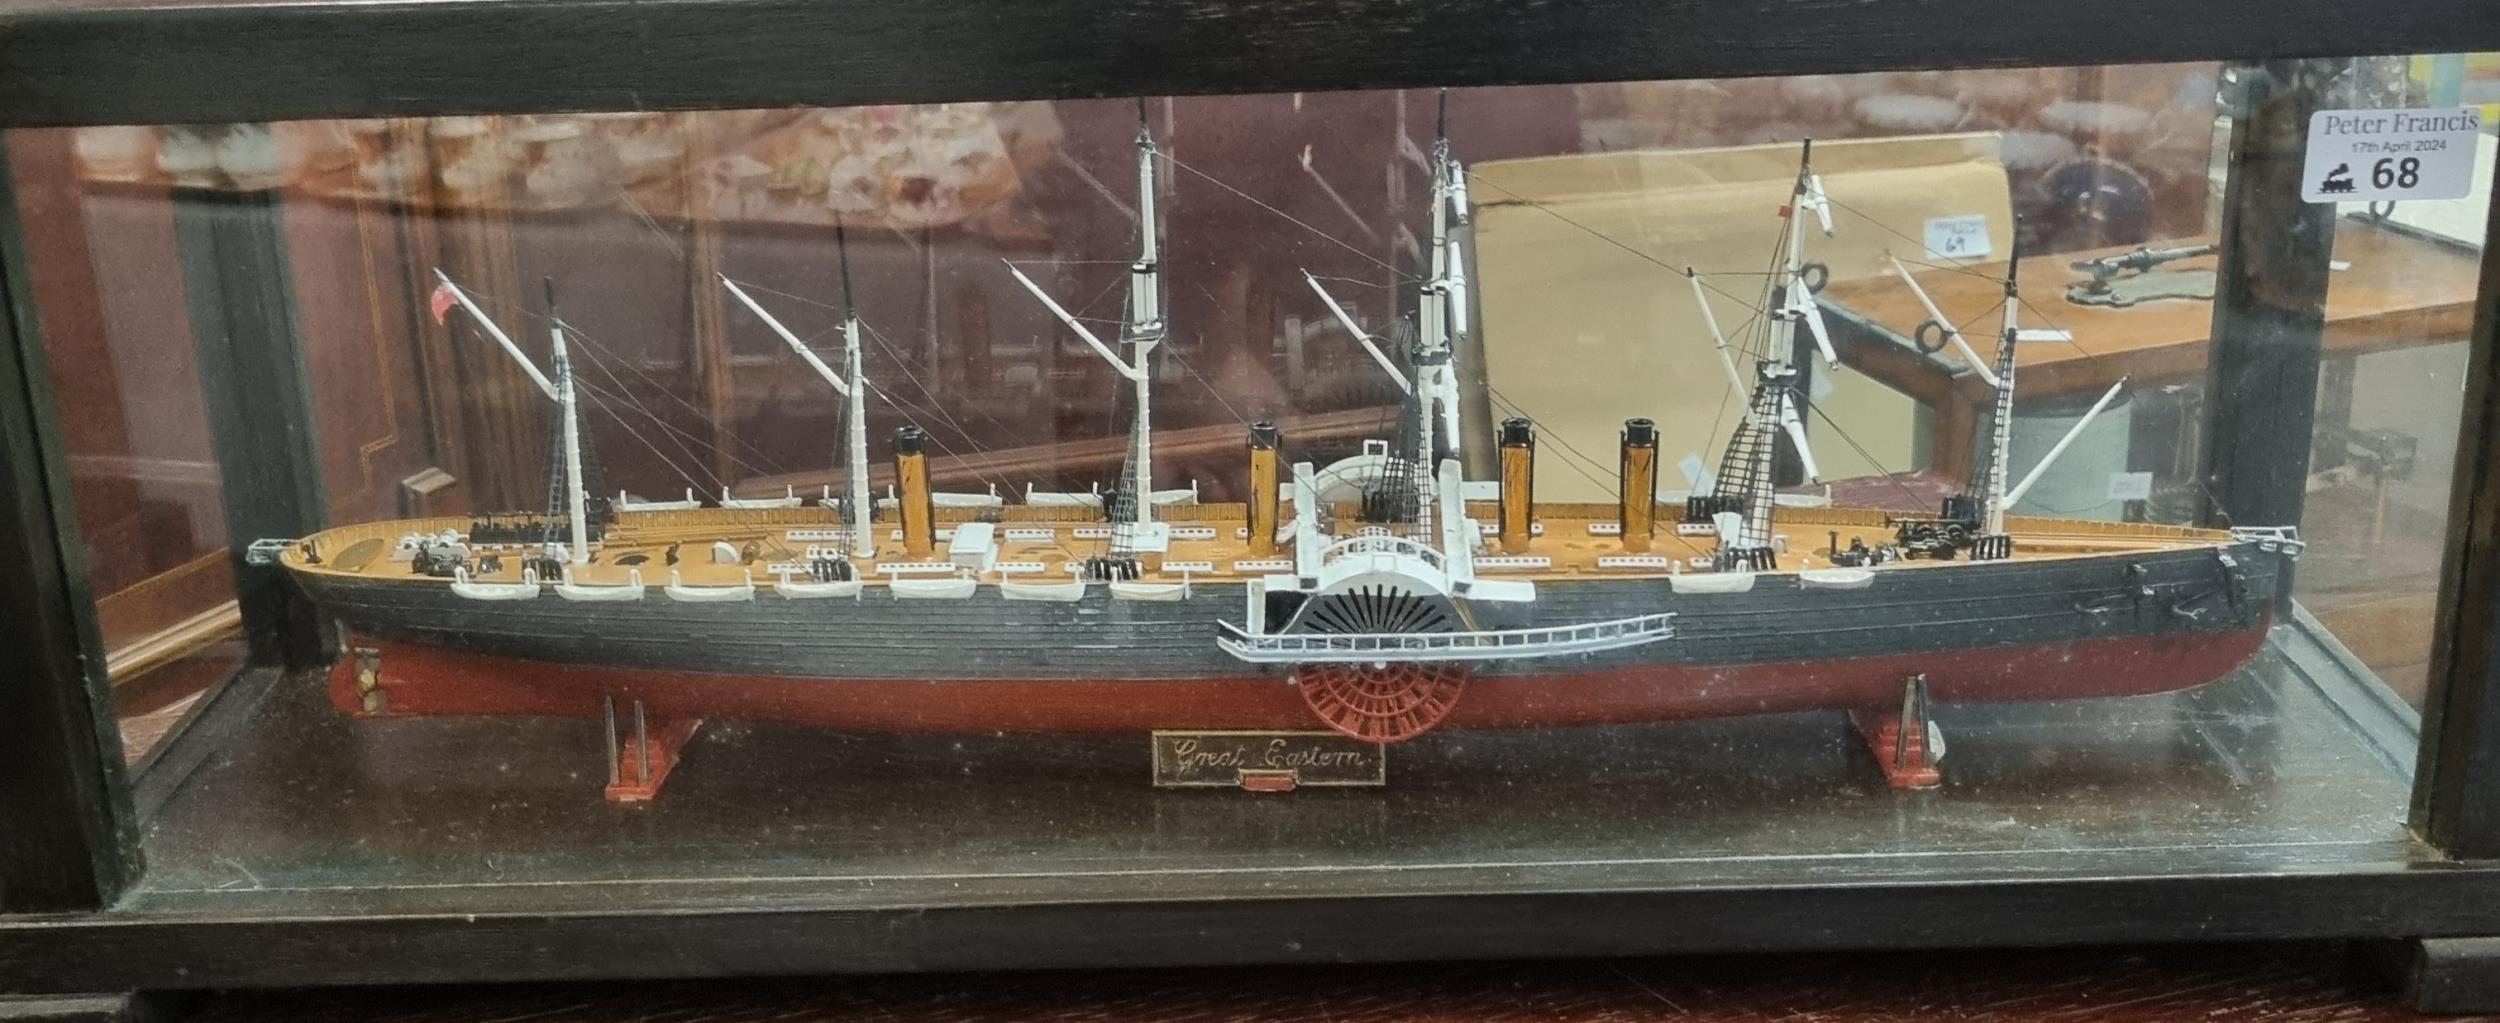 Cased scale model of the transitional steam sailing vessel The Great Eastern , designed by famous